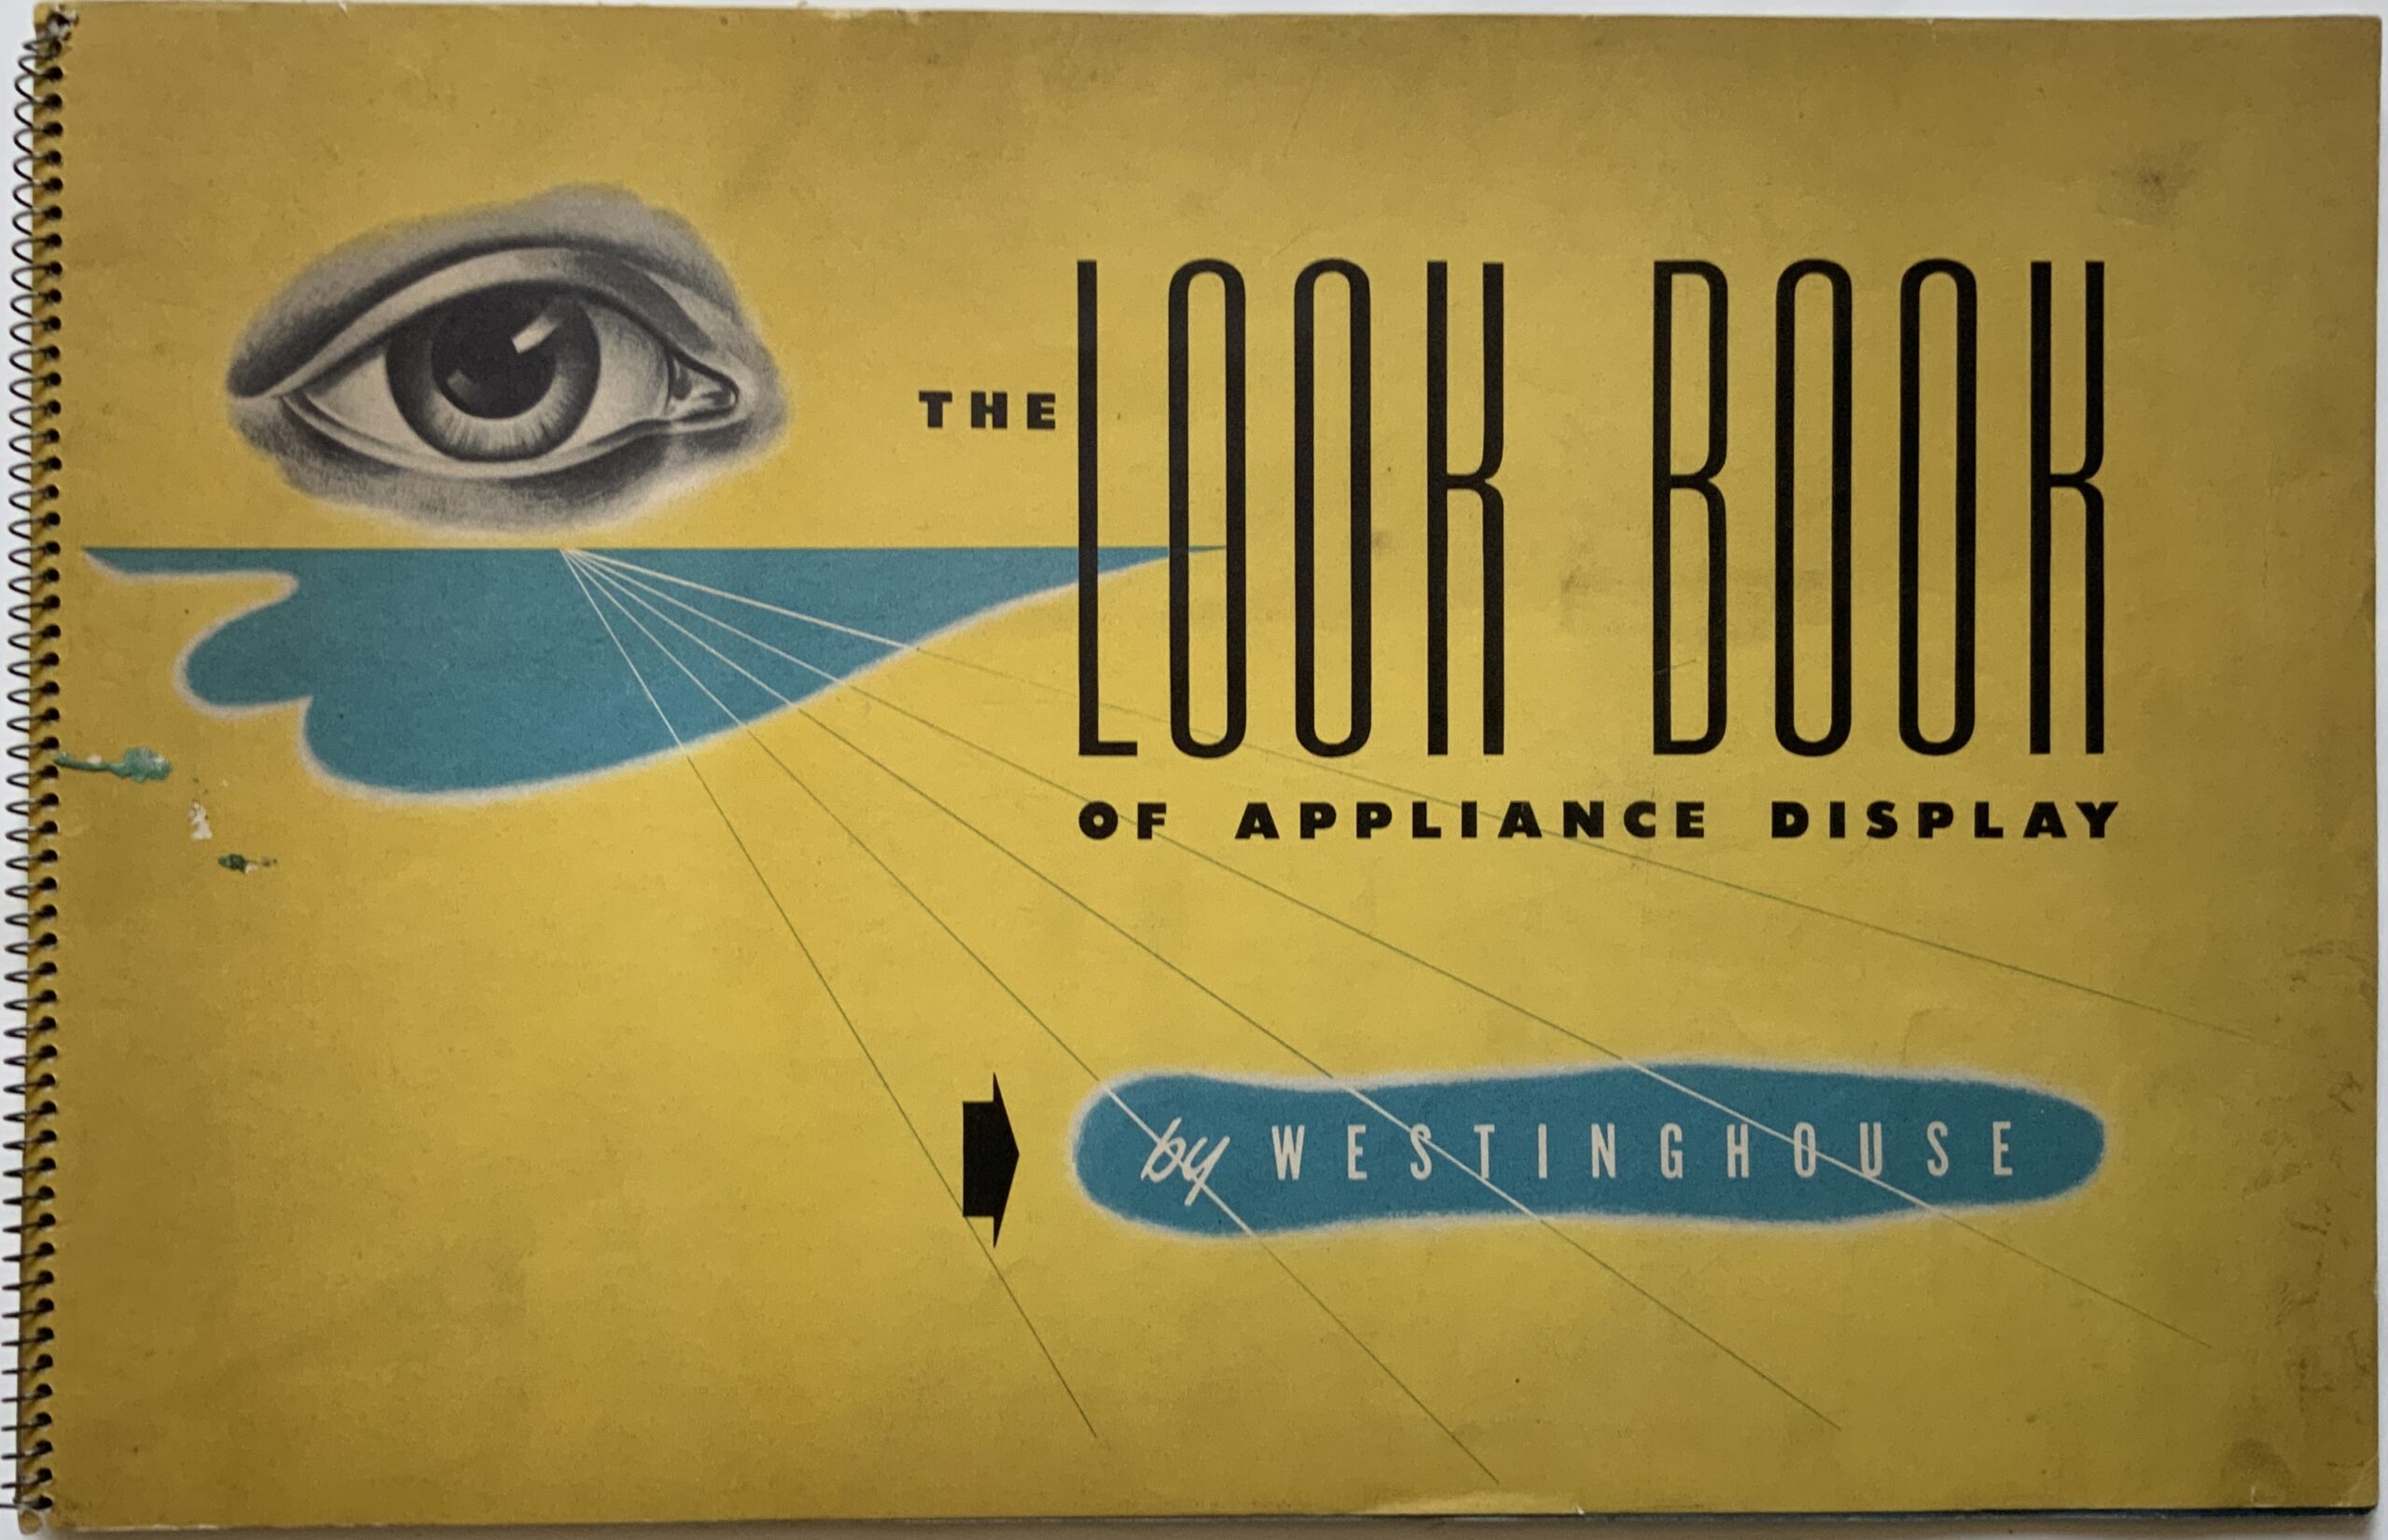 M568	THE WESTINGHOUSE LOOK BOOK OF APPLIANCE DISPLAY